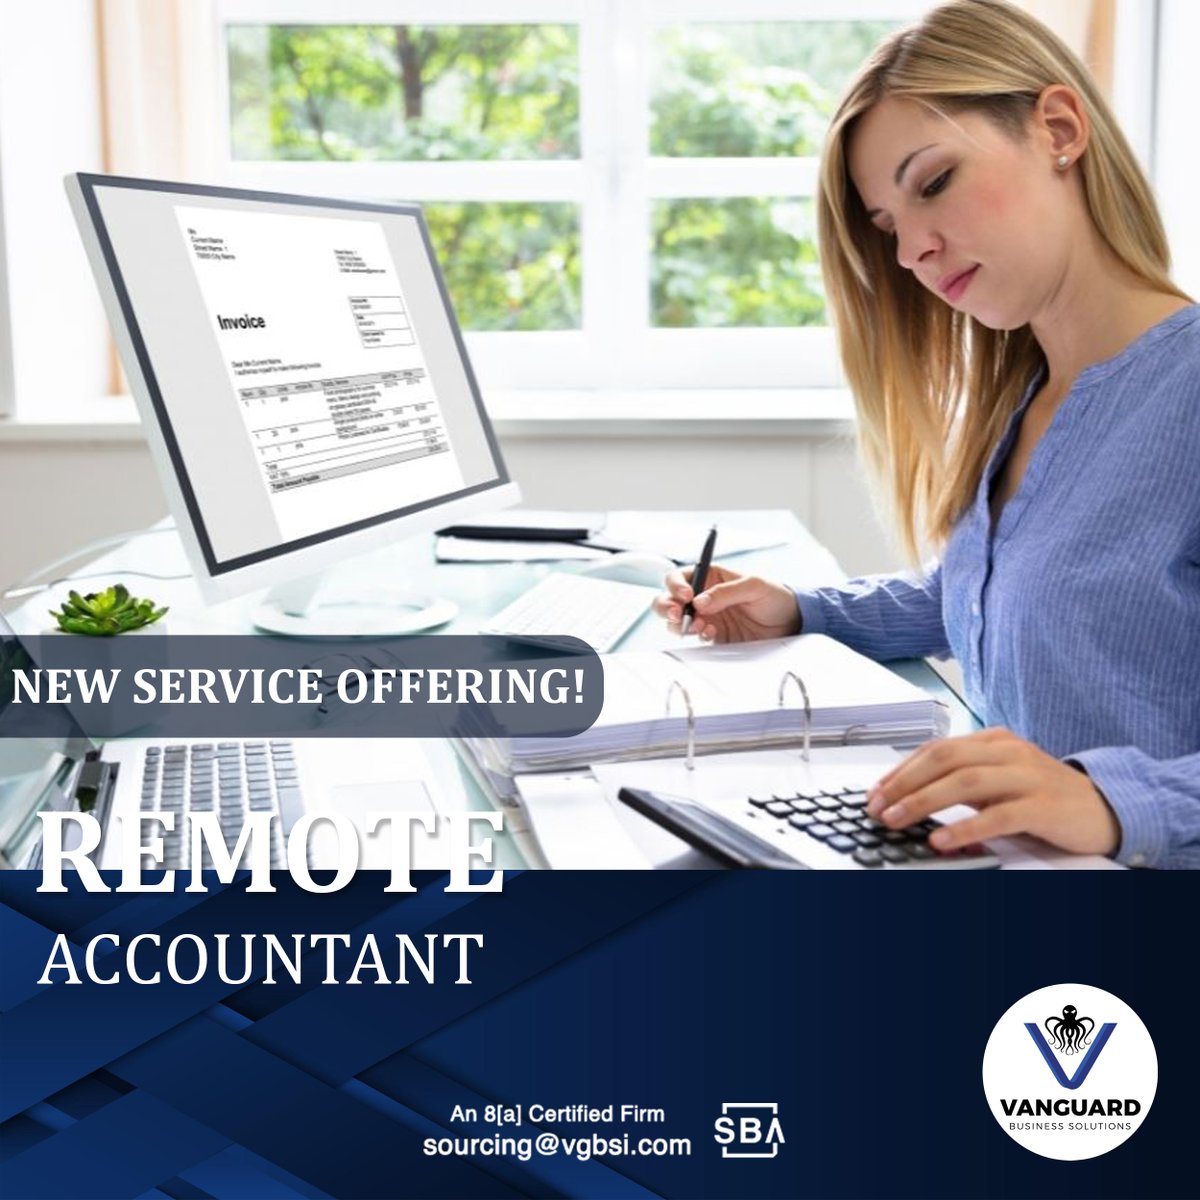 New Service Offering!
Remote Accountant
#RemoteAccountant #VanguardBusinessSolutions